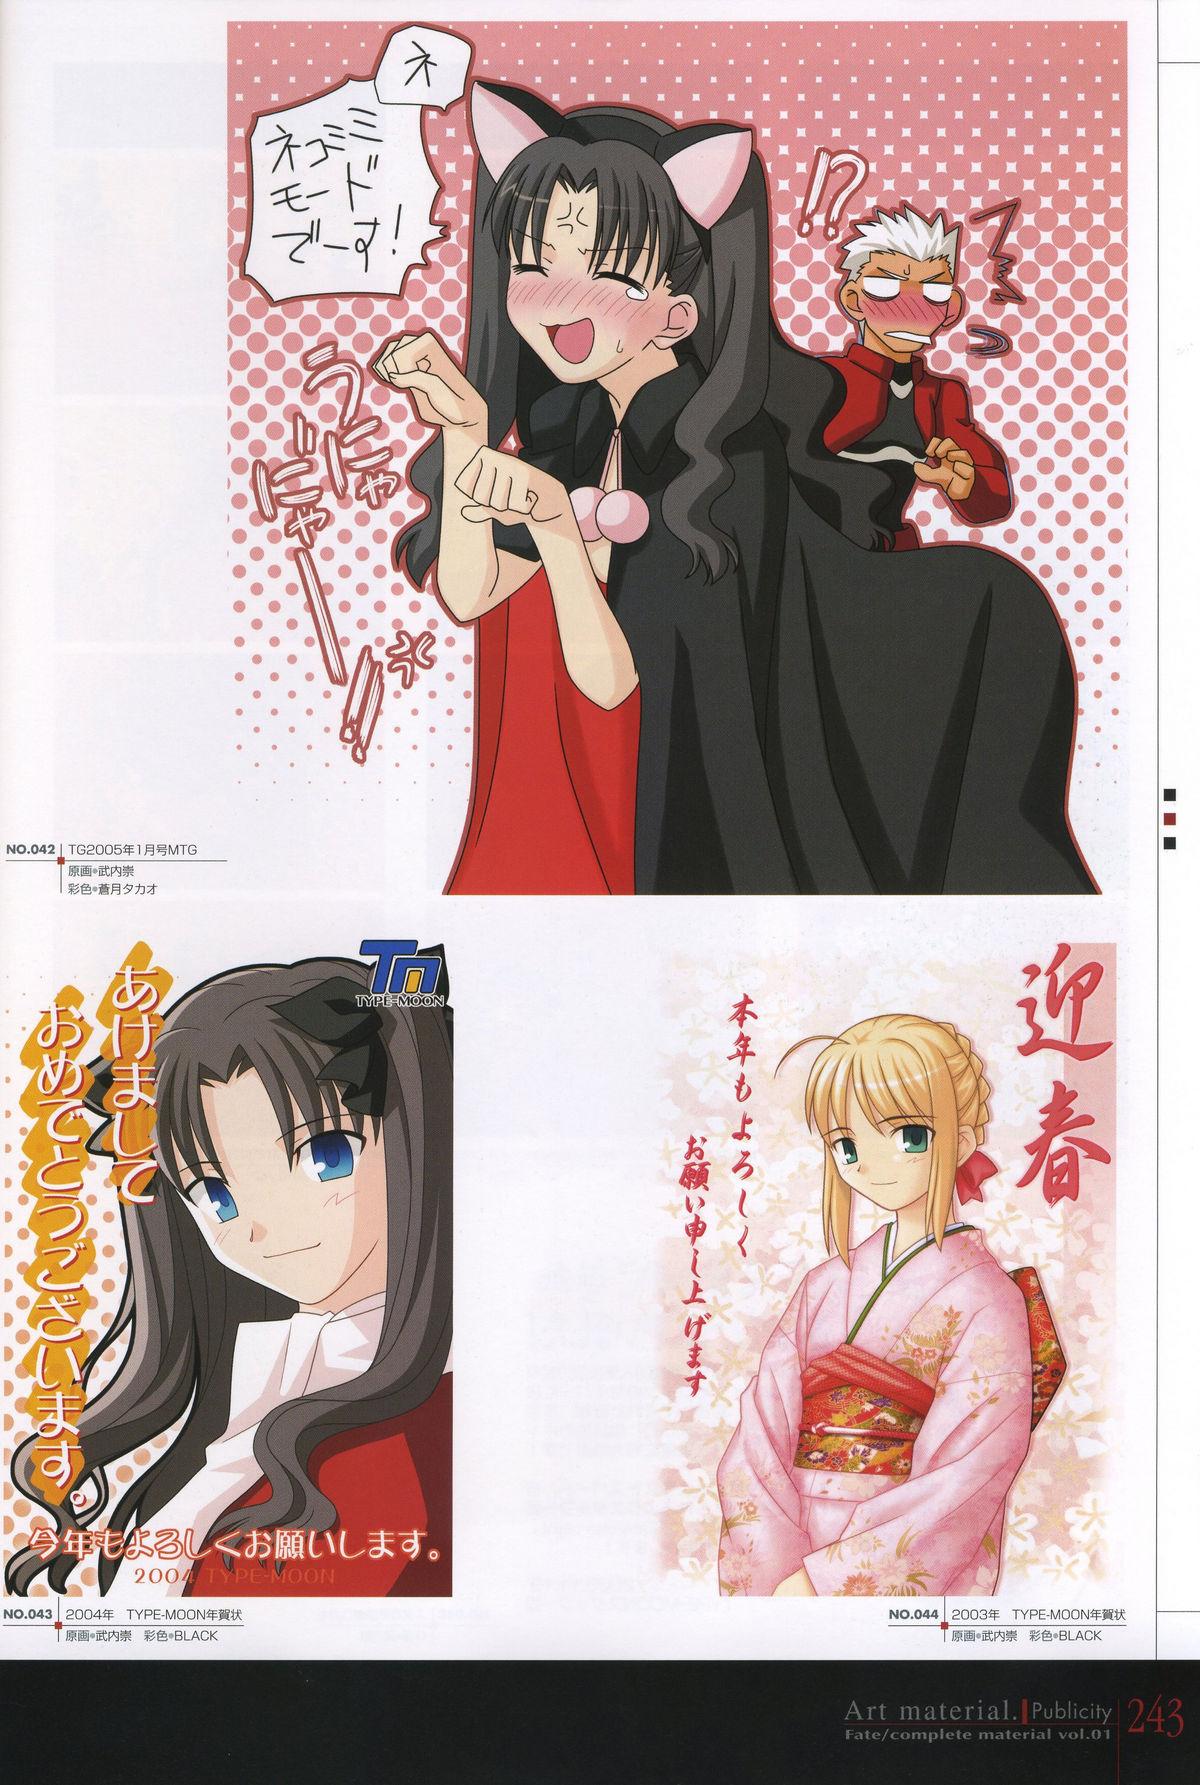 Fate/complete material I - Art material. 247